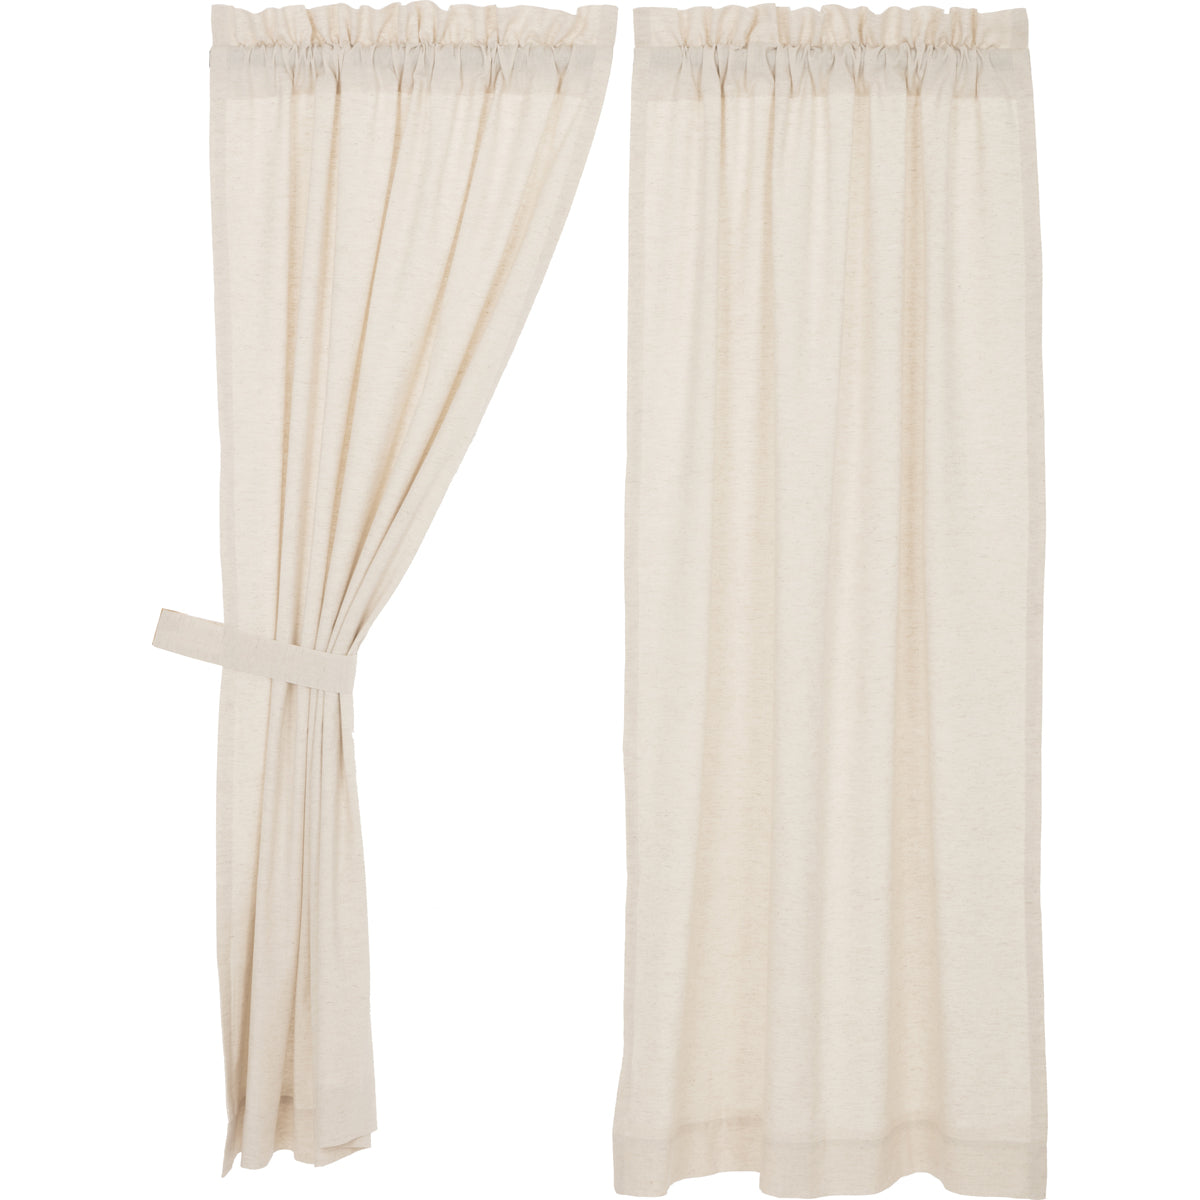 Simple Life Flax Natural Short Panel Country Style Curtain Set of 2 63"x36"